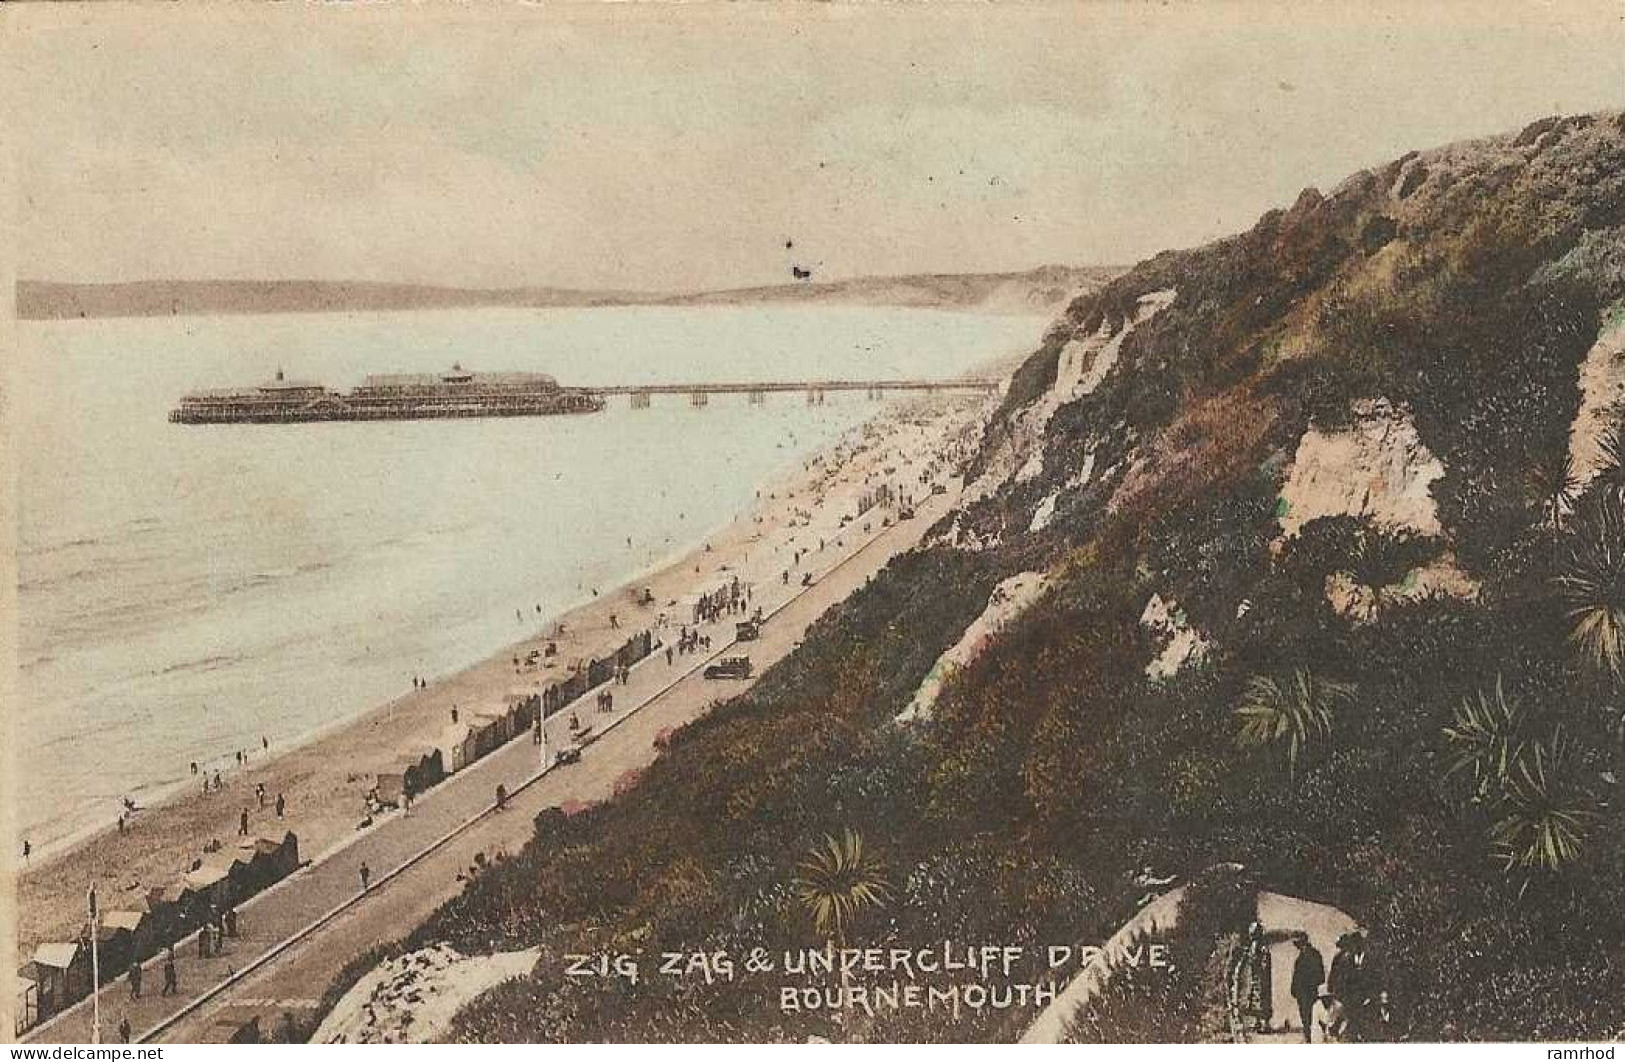 BOURNEMOUTH, Zig Zag & Undercliff Drive (Publisher - Unknown) Date - September 1927, Used (Vintage) - Bournemouth (until 1972)